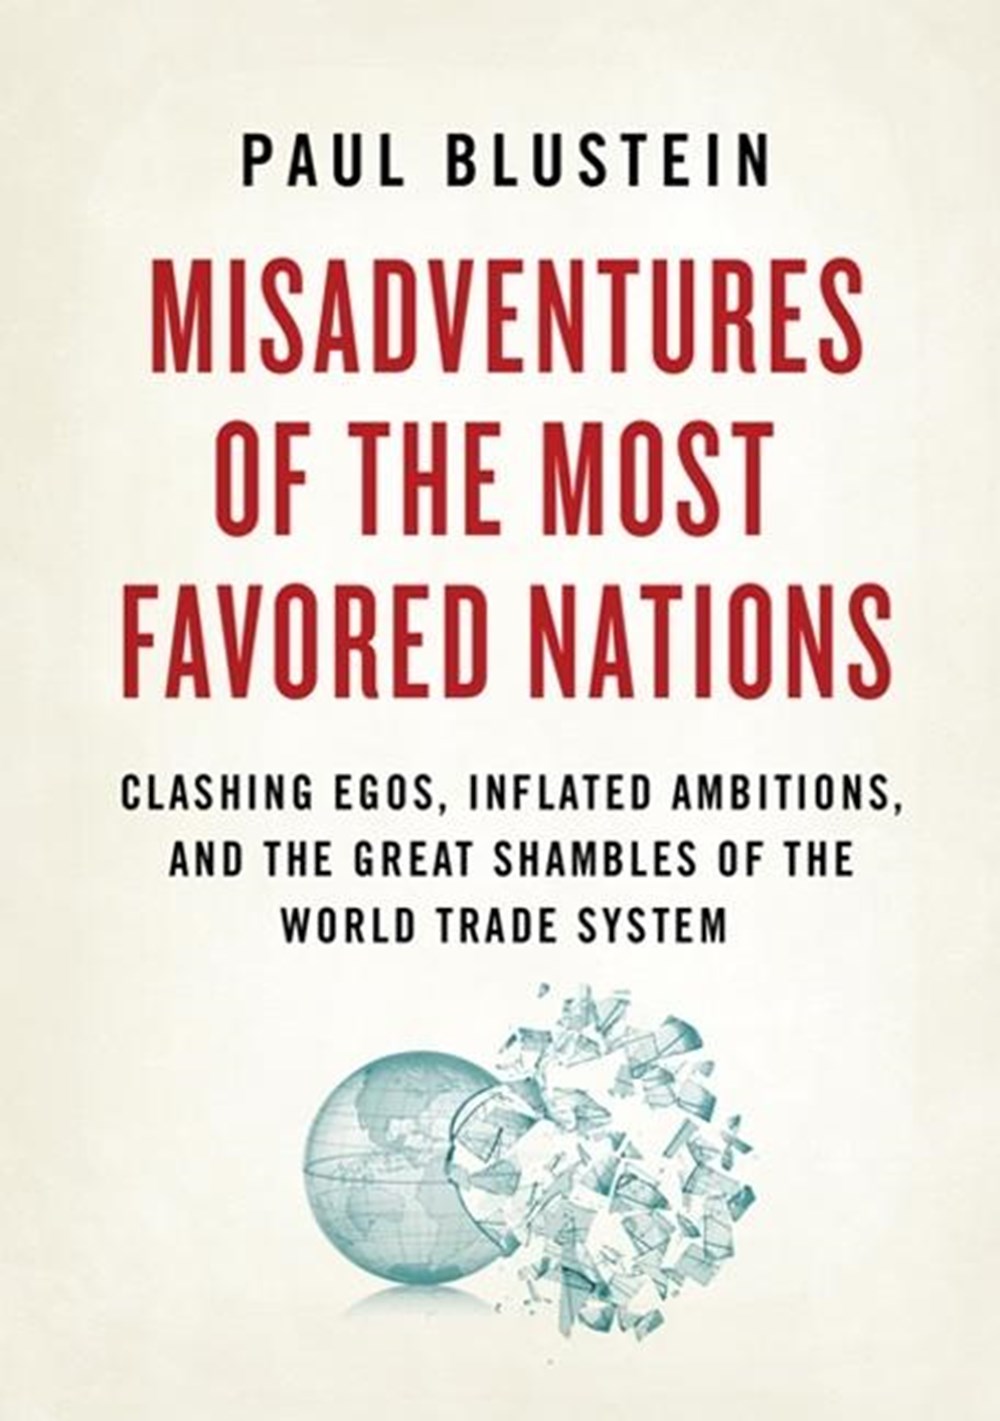 Misadventures of the Most Favored Nations: Clashing Egos, Inflated Ambitions, and the Great Shambles